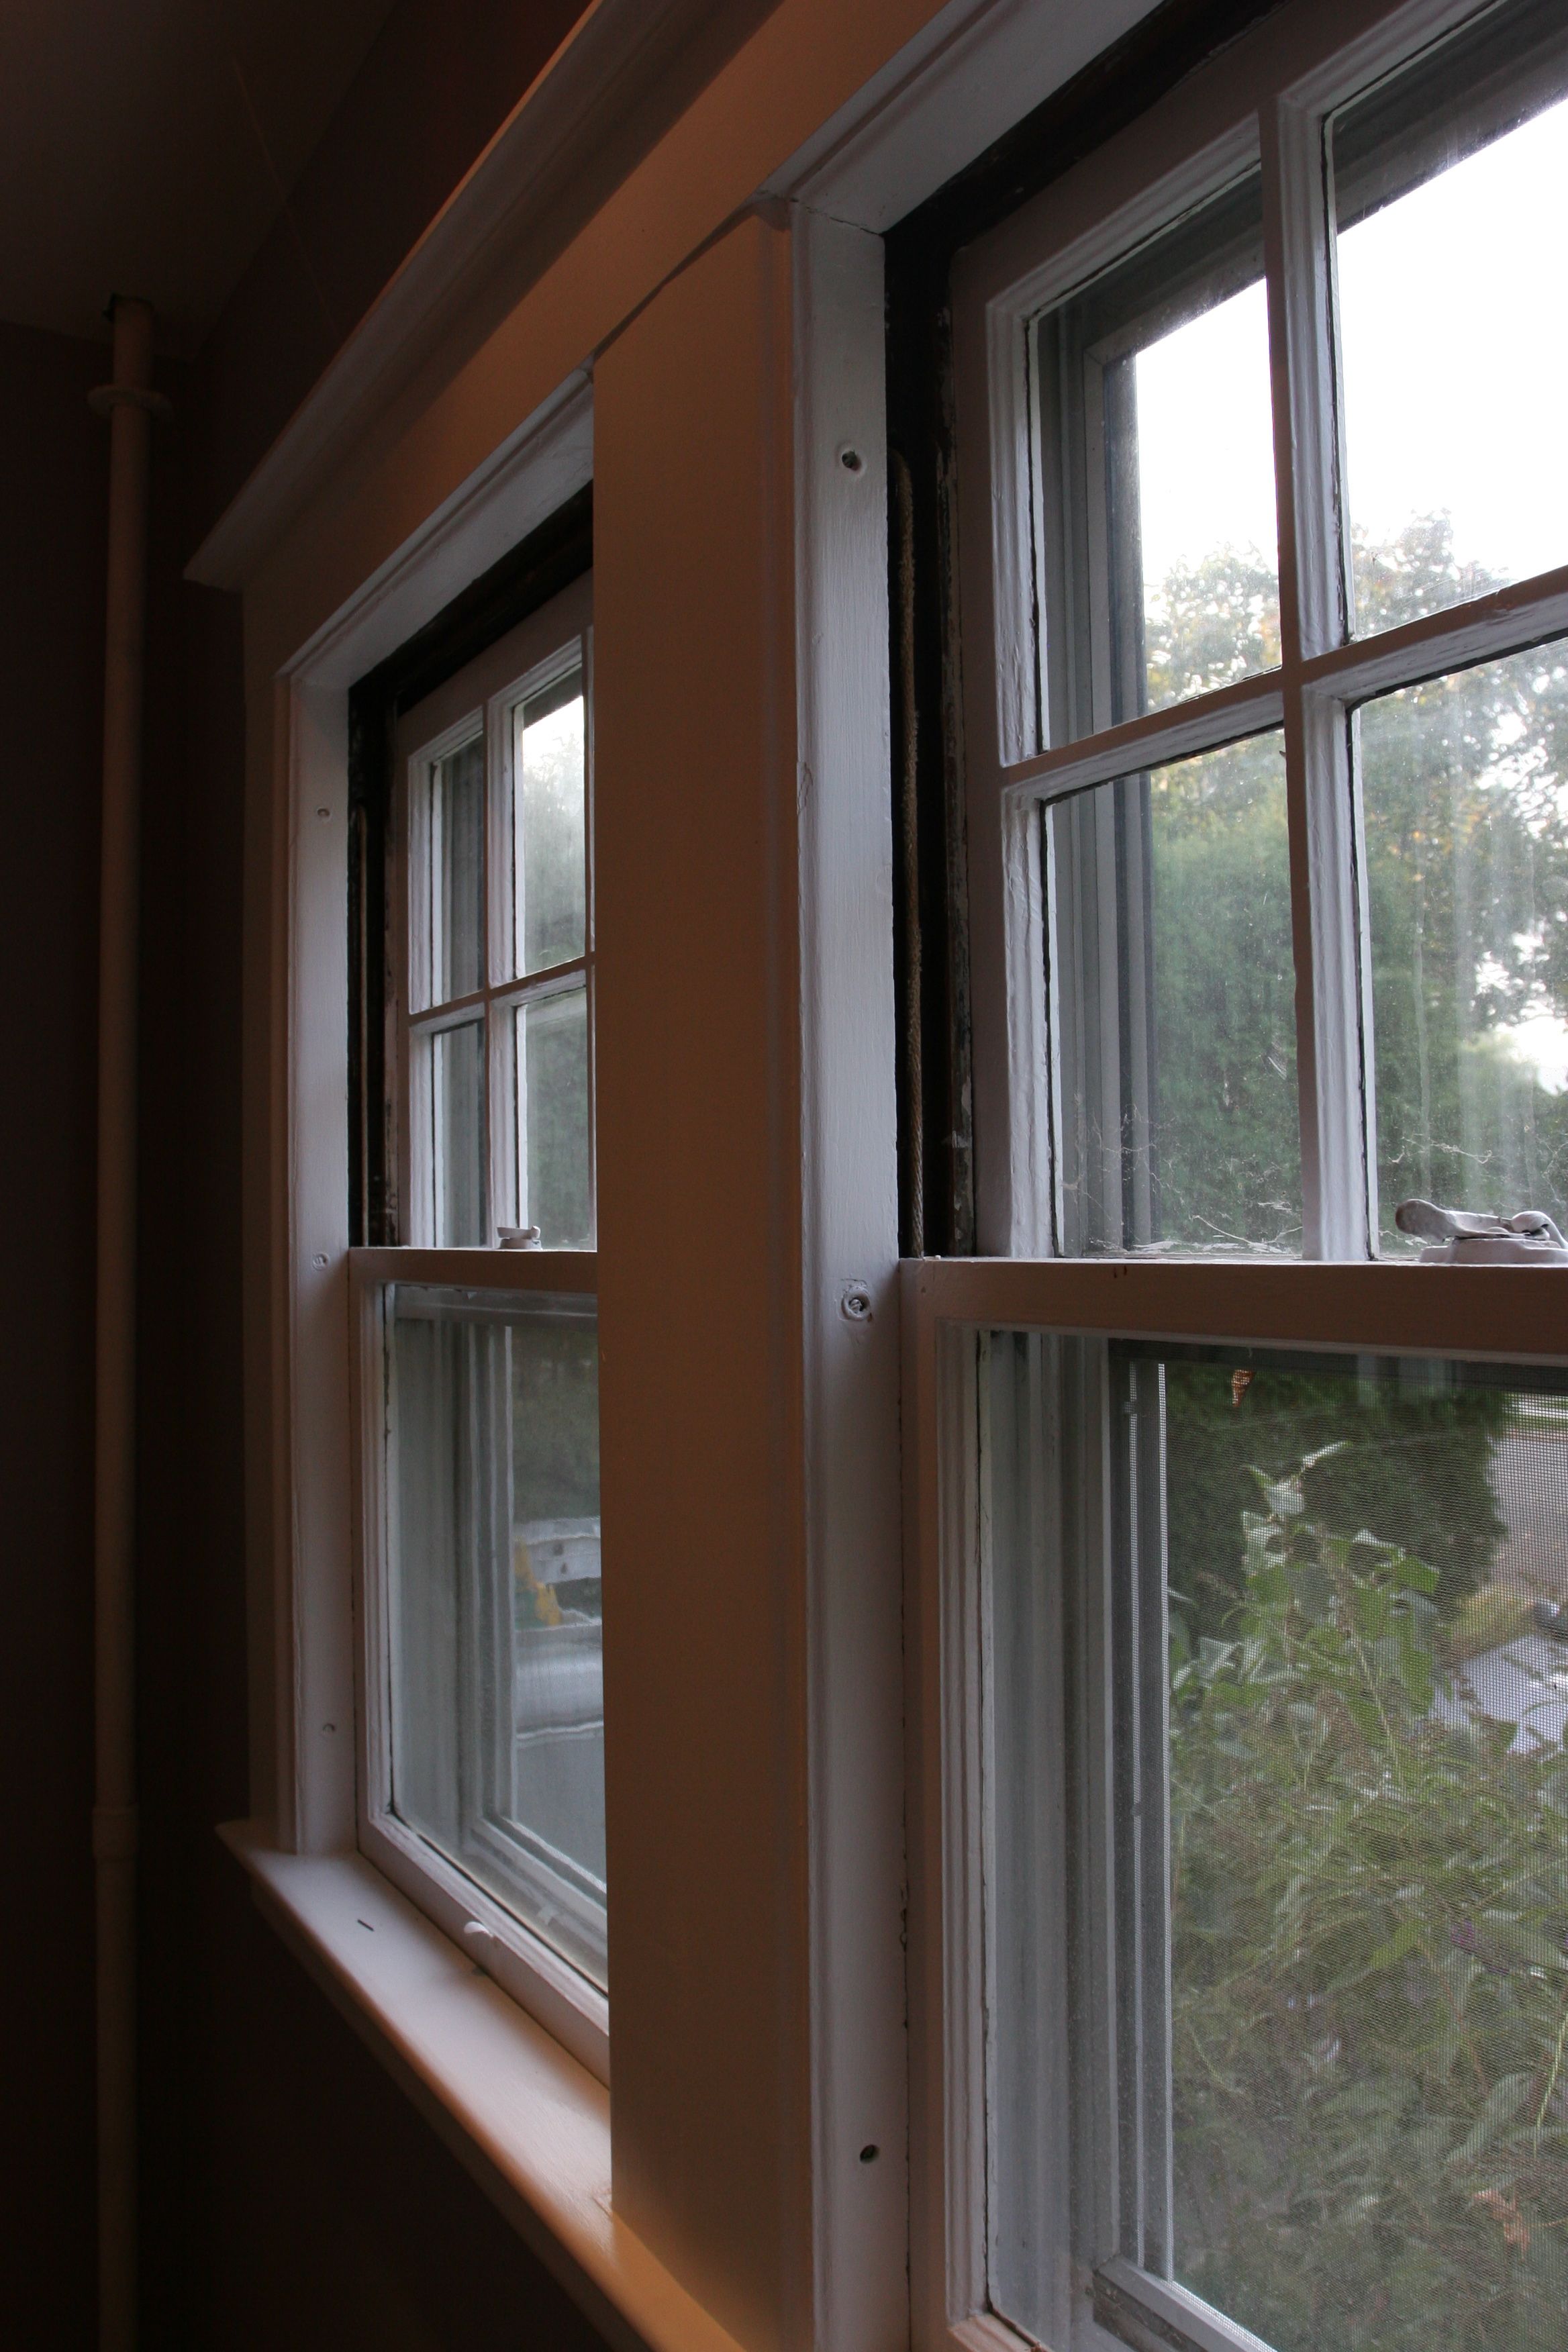 The window as it should have been. The trim from the old kitchen has been exorcised from the house.